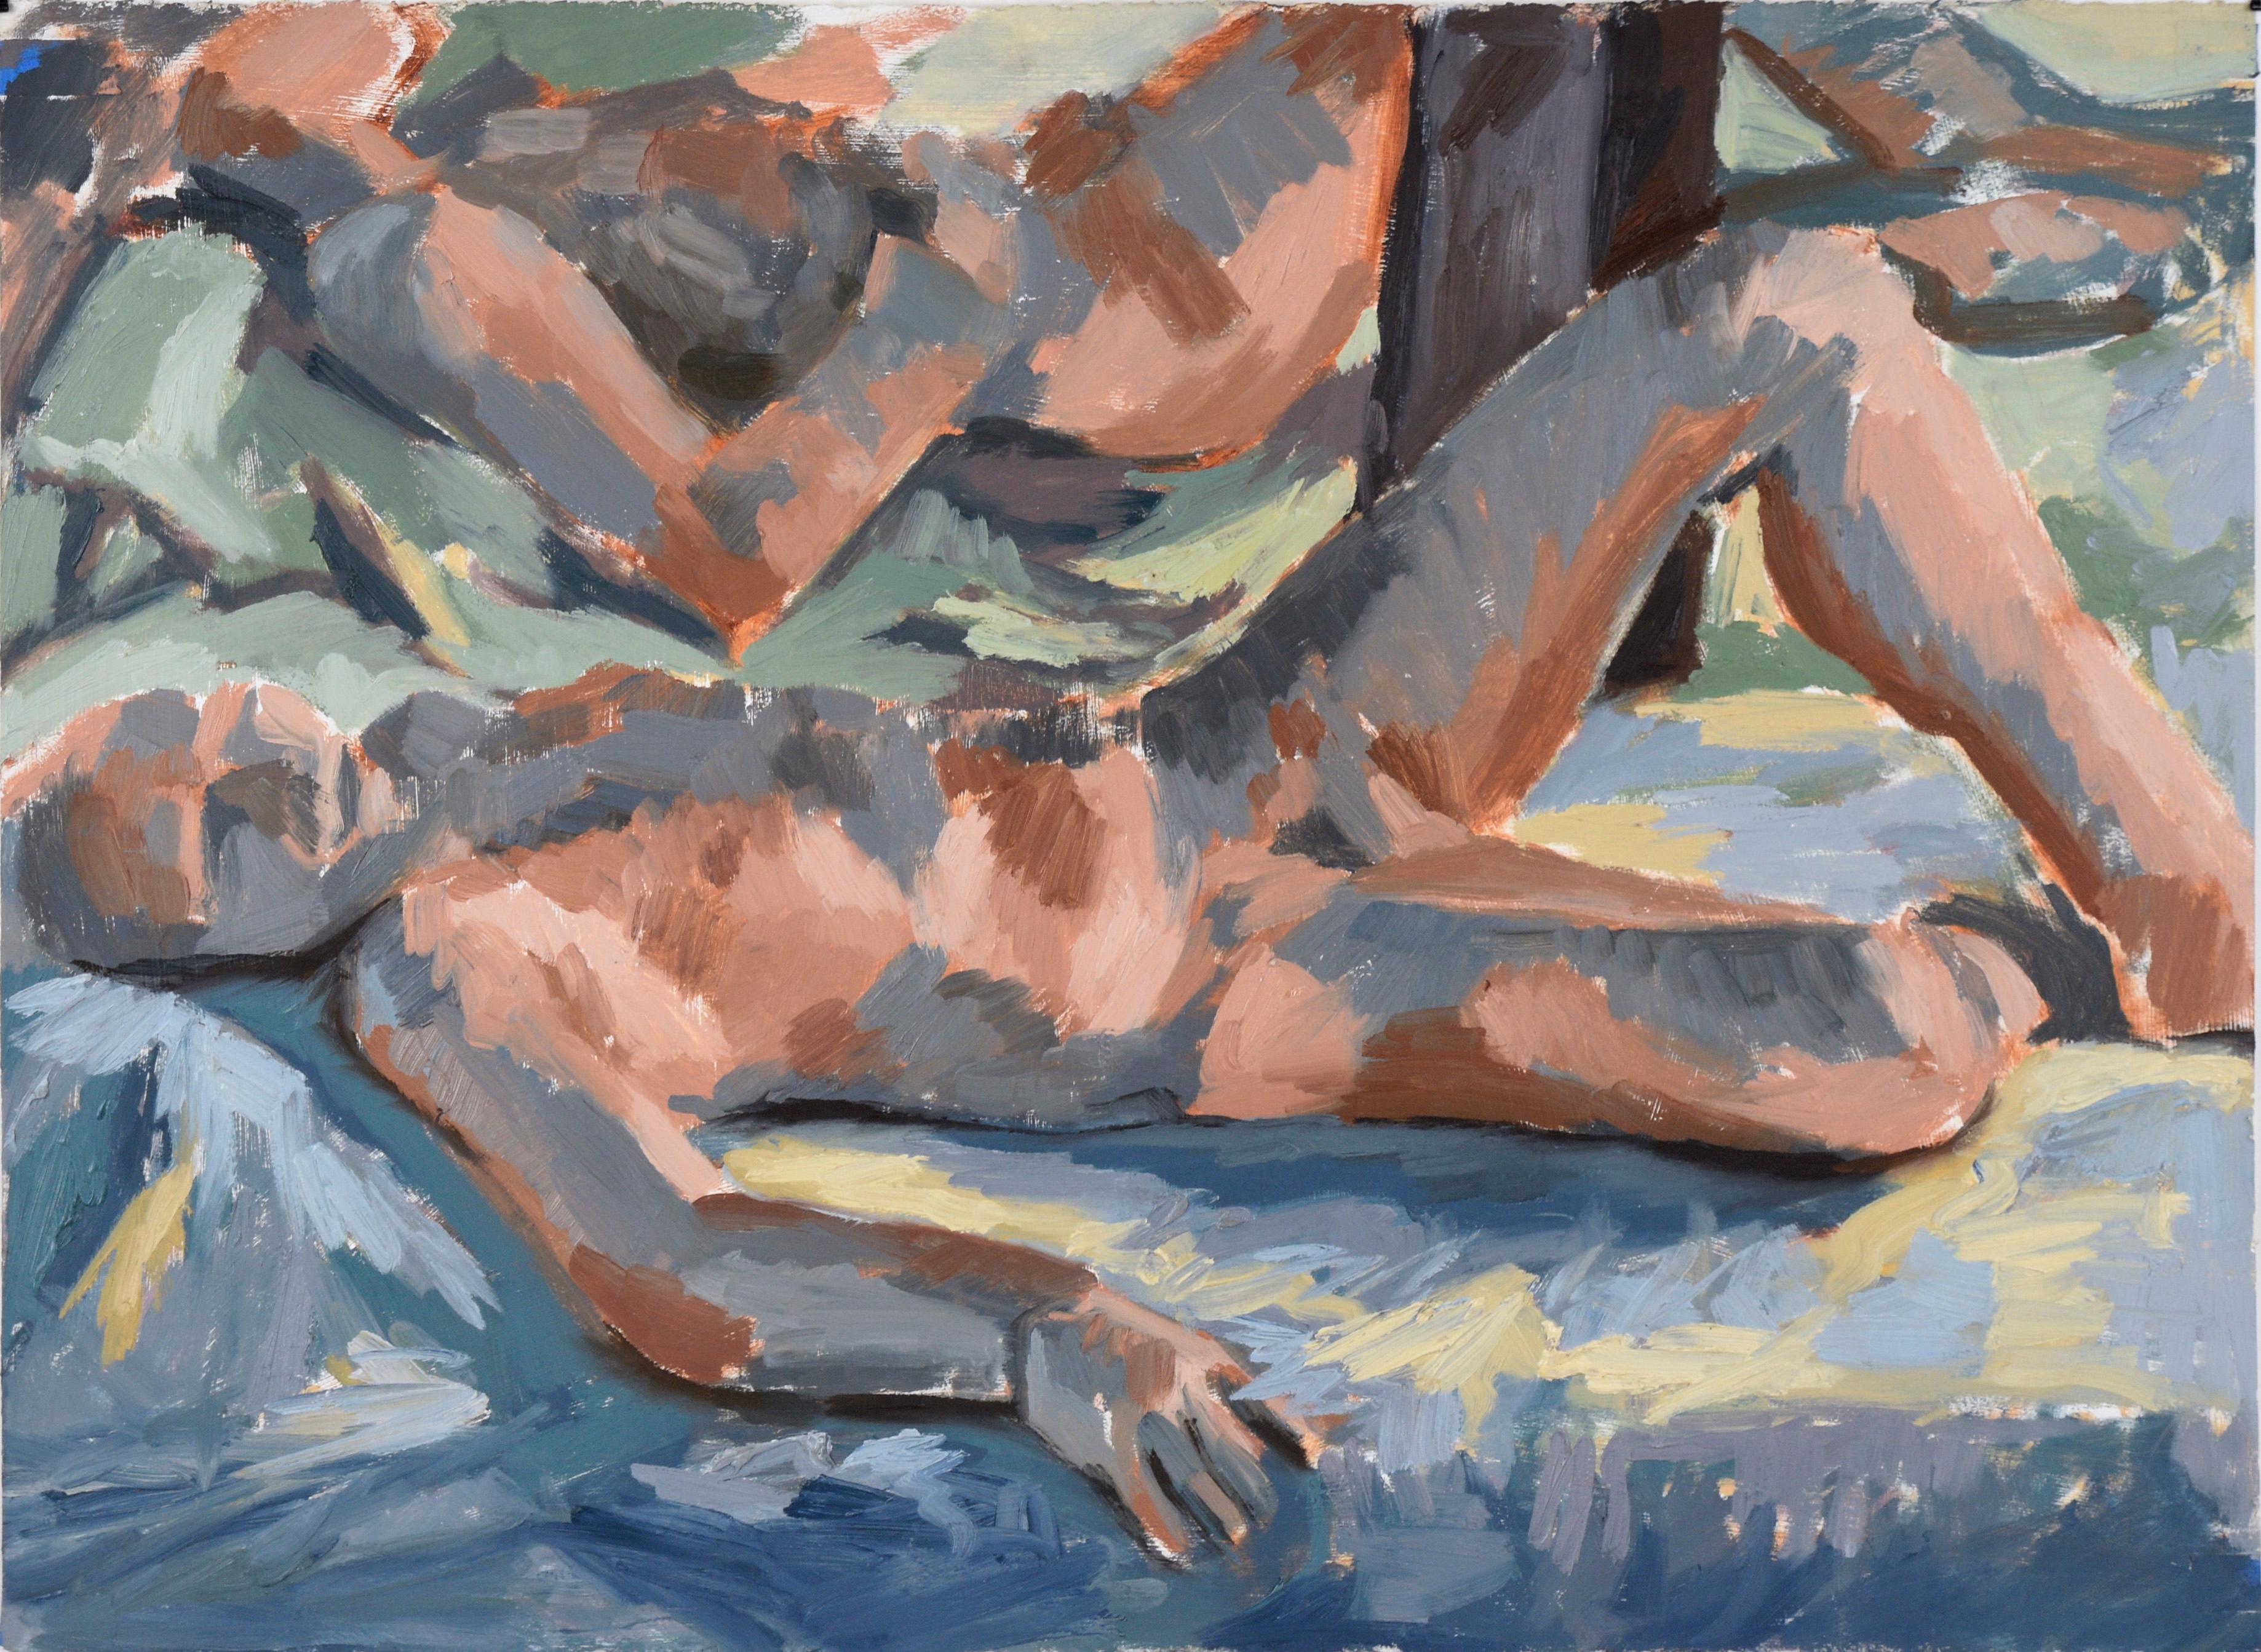 Two Reclining Figures - Bay Area Figurative School Abstract Expressionist